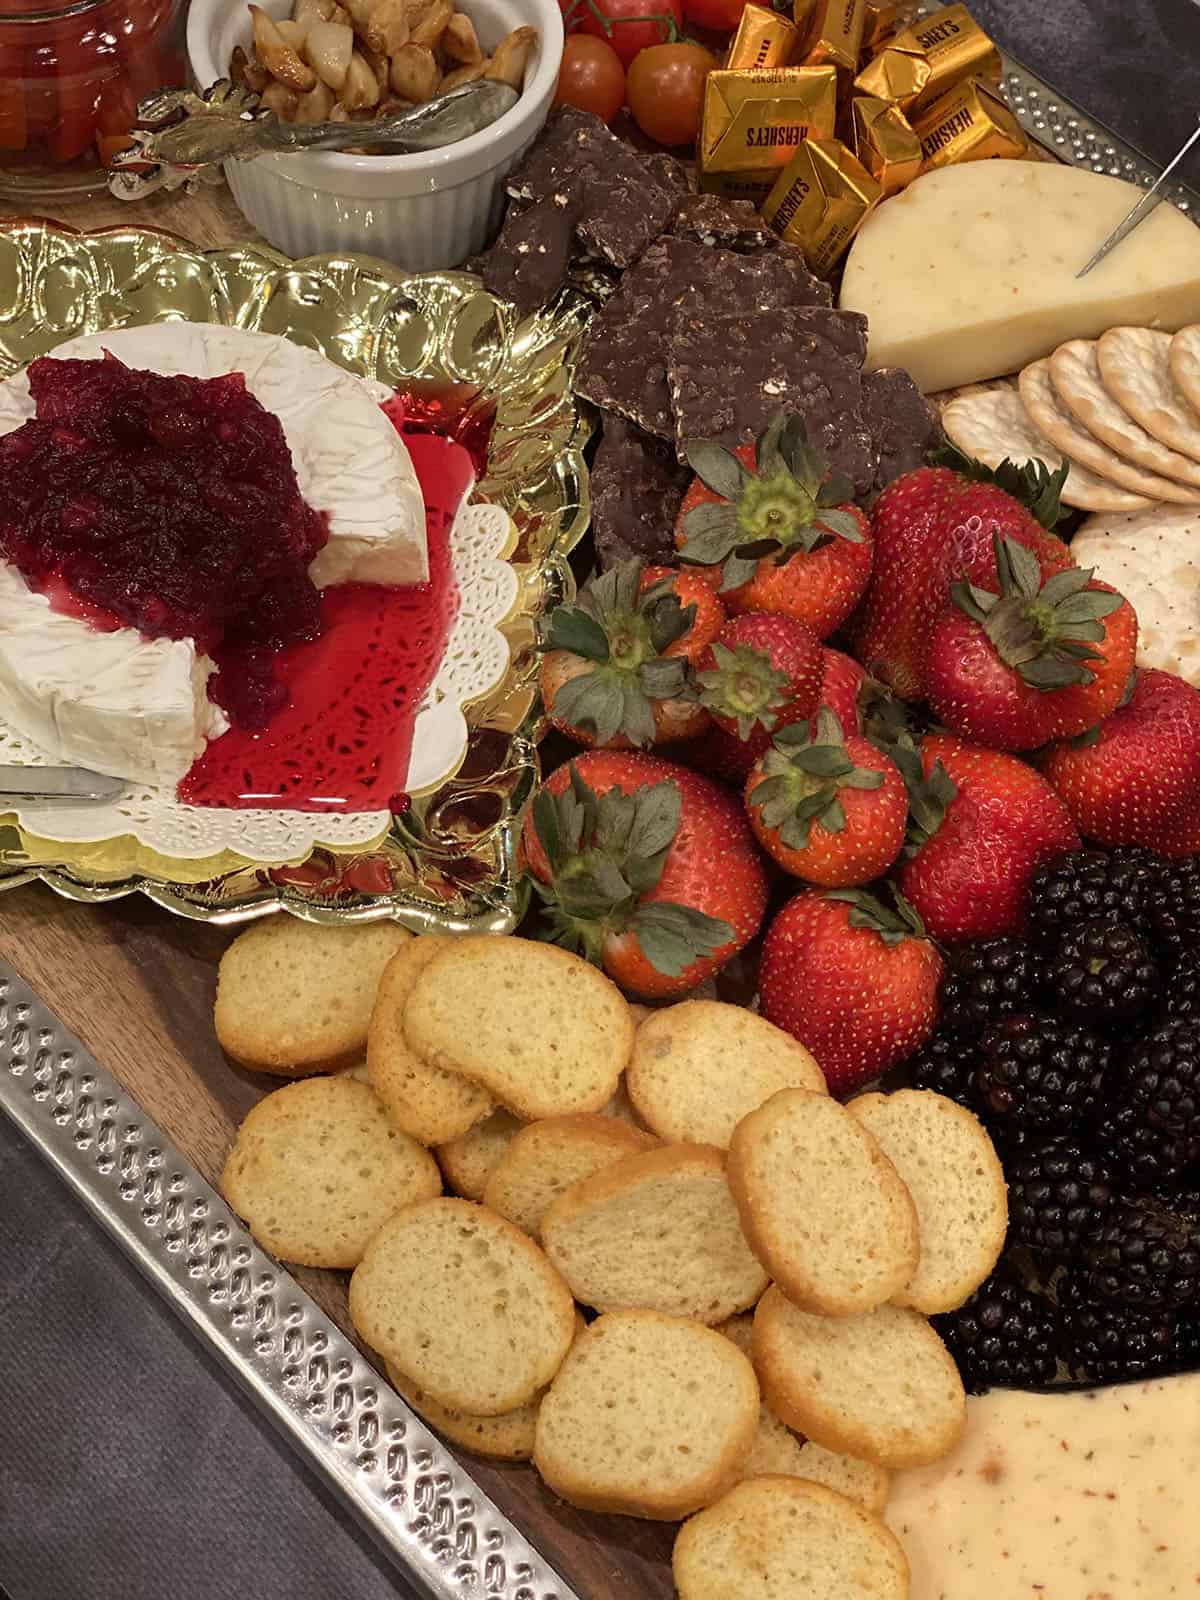 wood and silver board with strawberries, blackberries, assorted cheeses, roasted garlic, cranberry sauce, chocolate and crackers